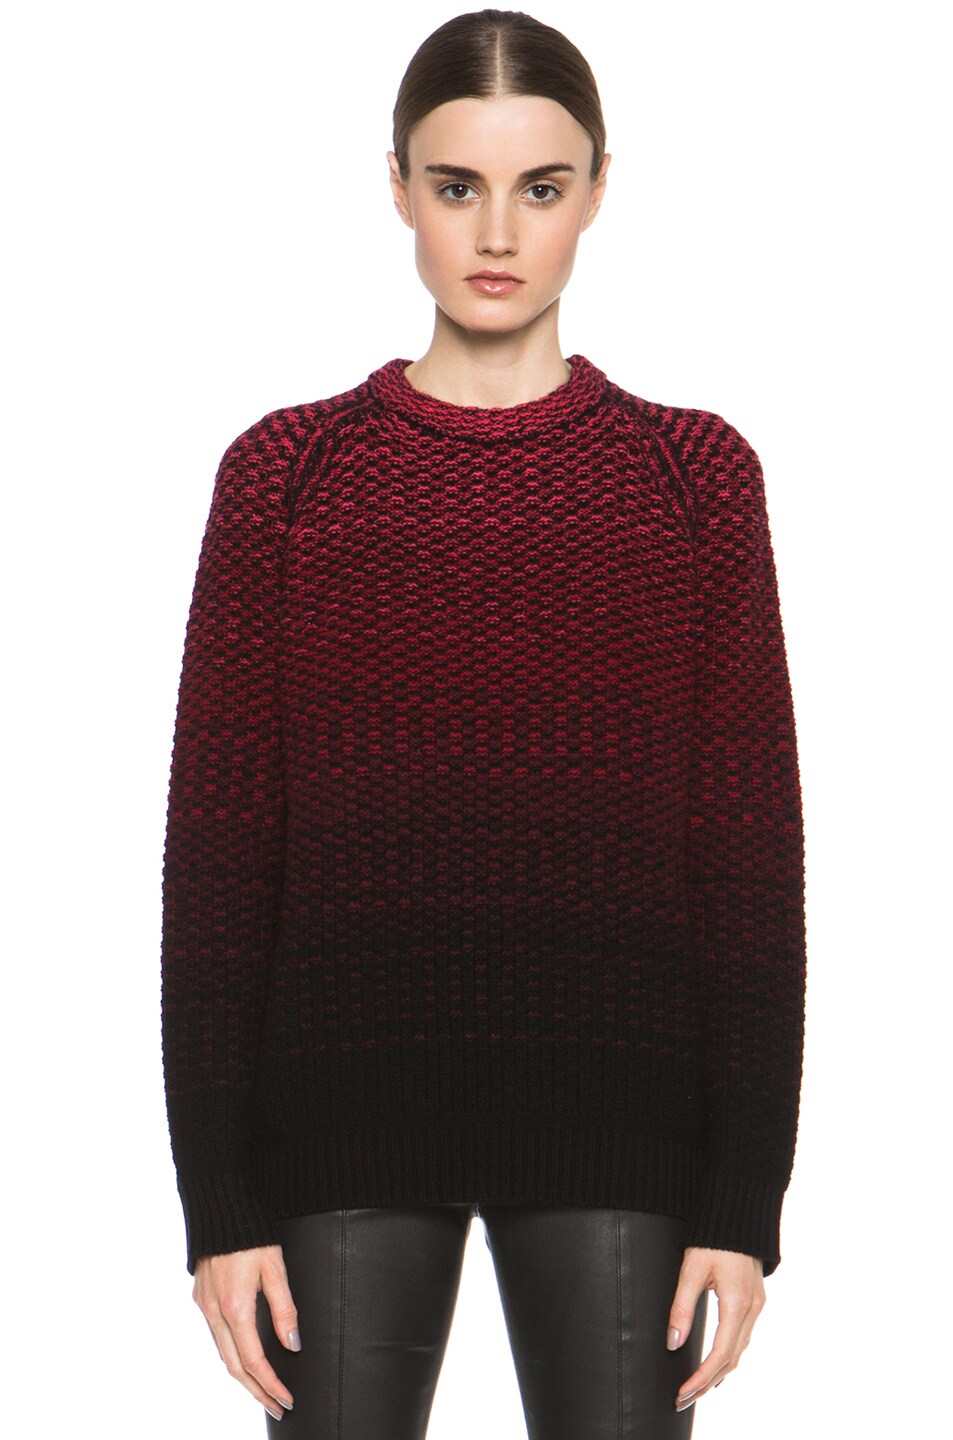 Proenza Schouler Wool Cashmere Sweater in Red Ombre | FWRD